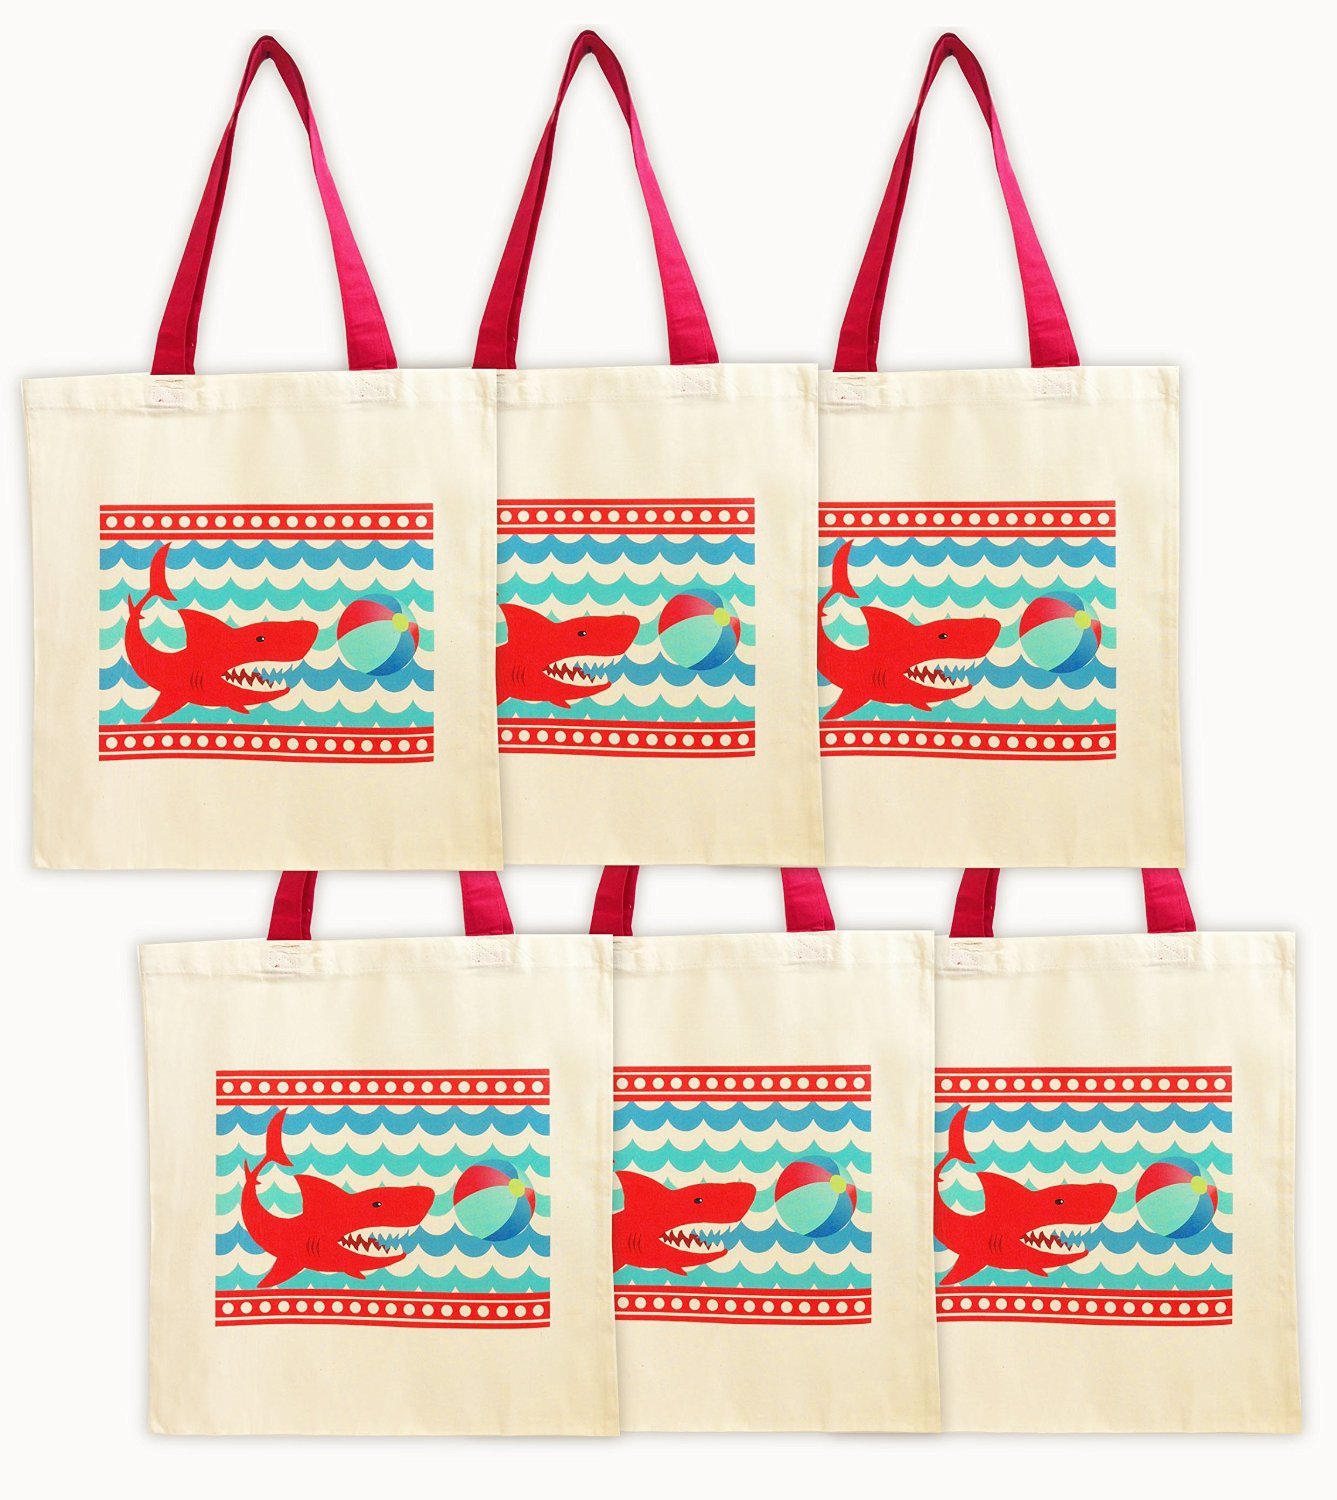 https://poppartiesink.com/wp-content/uploads/imported/Shark-Party-Tote-Bags-Set-of-6-Party-Favor-Bags-B01DR8AHZ4.jpg